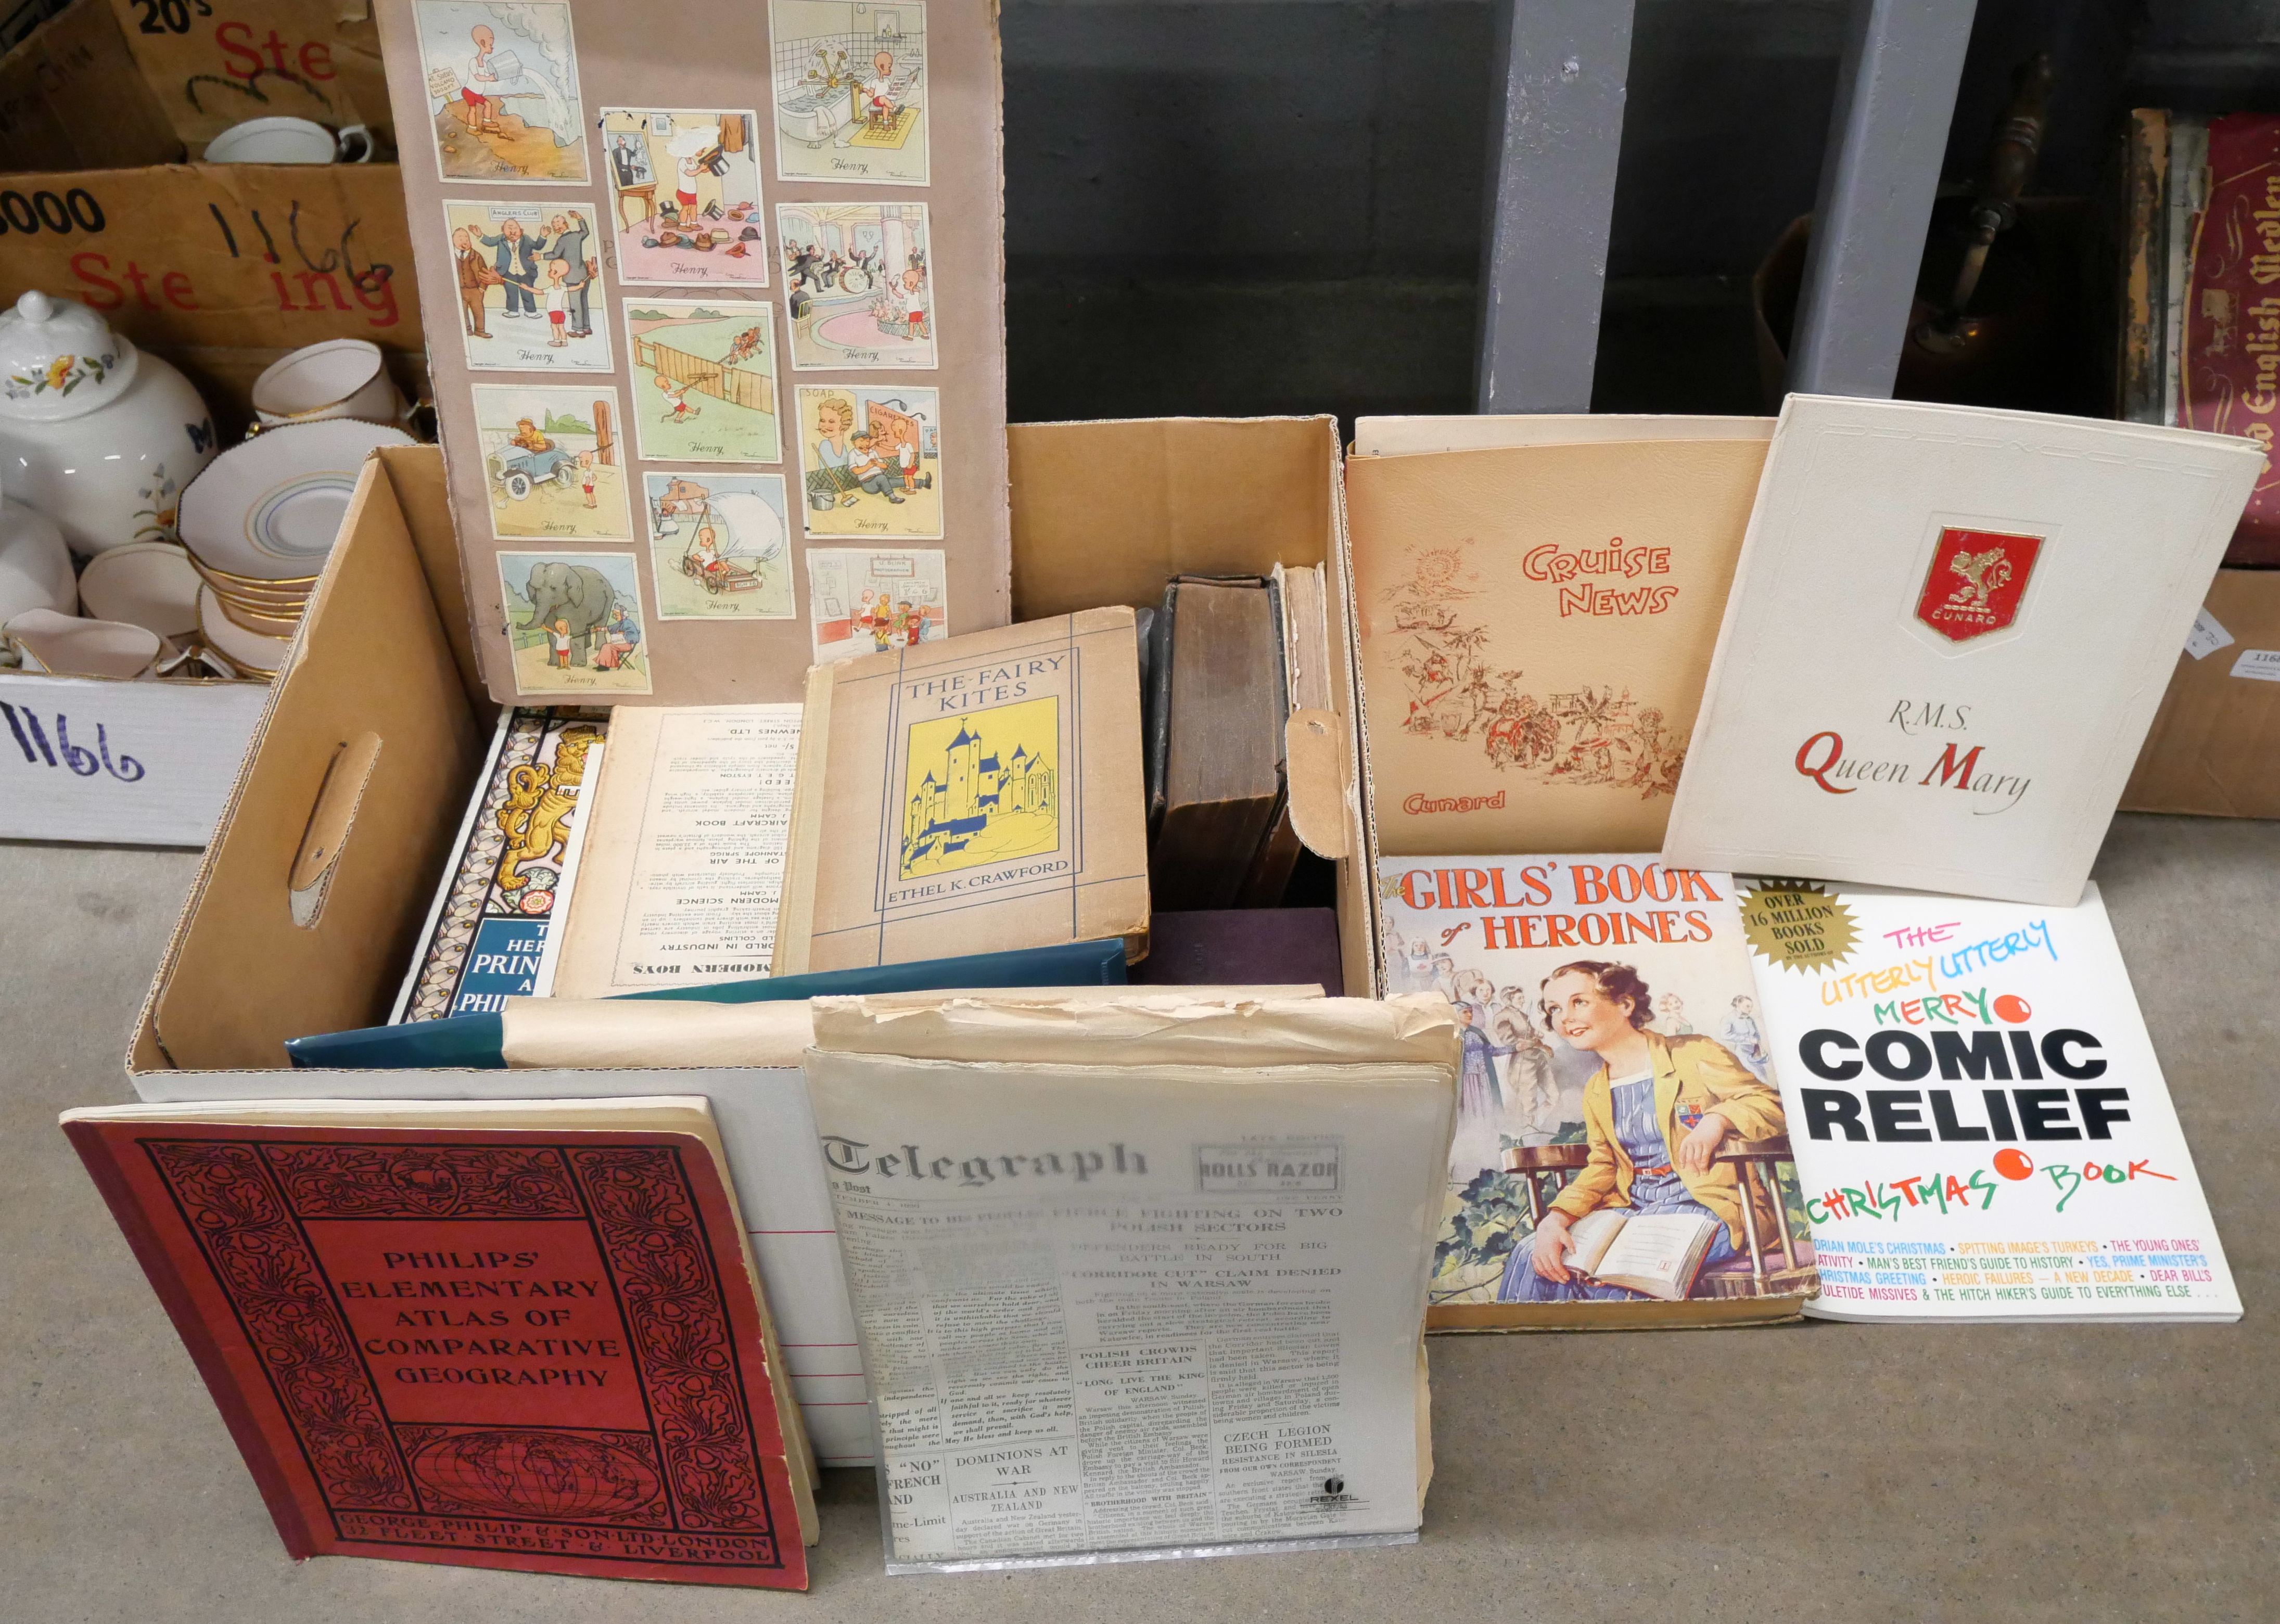 A box of books etc., The Fairy Kites, Cunard Lines Queen Mary and Cruise News, Ladybird books, Scout